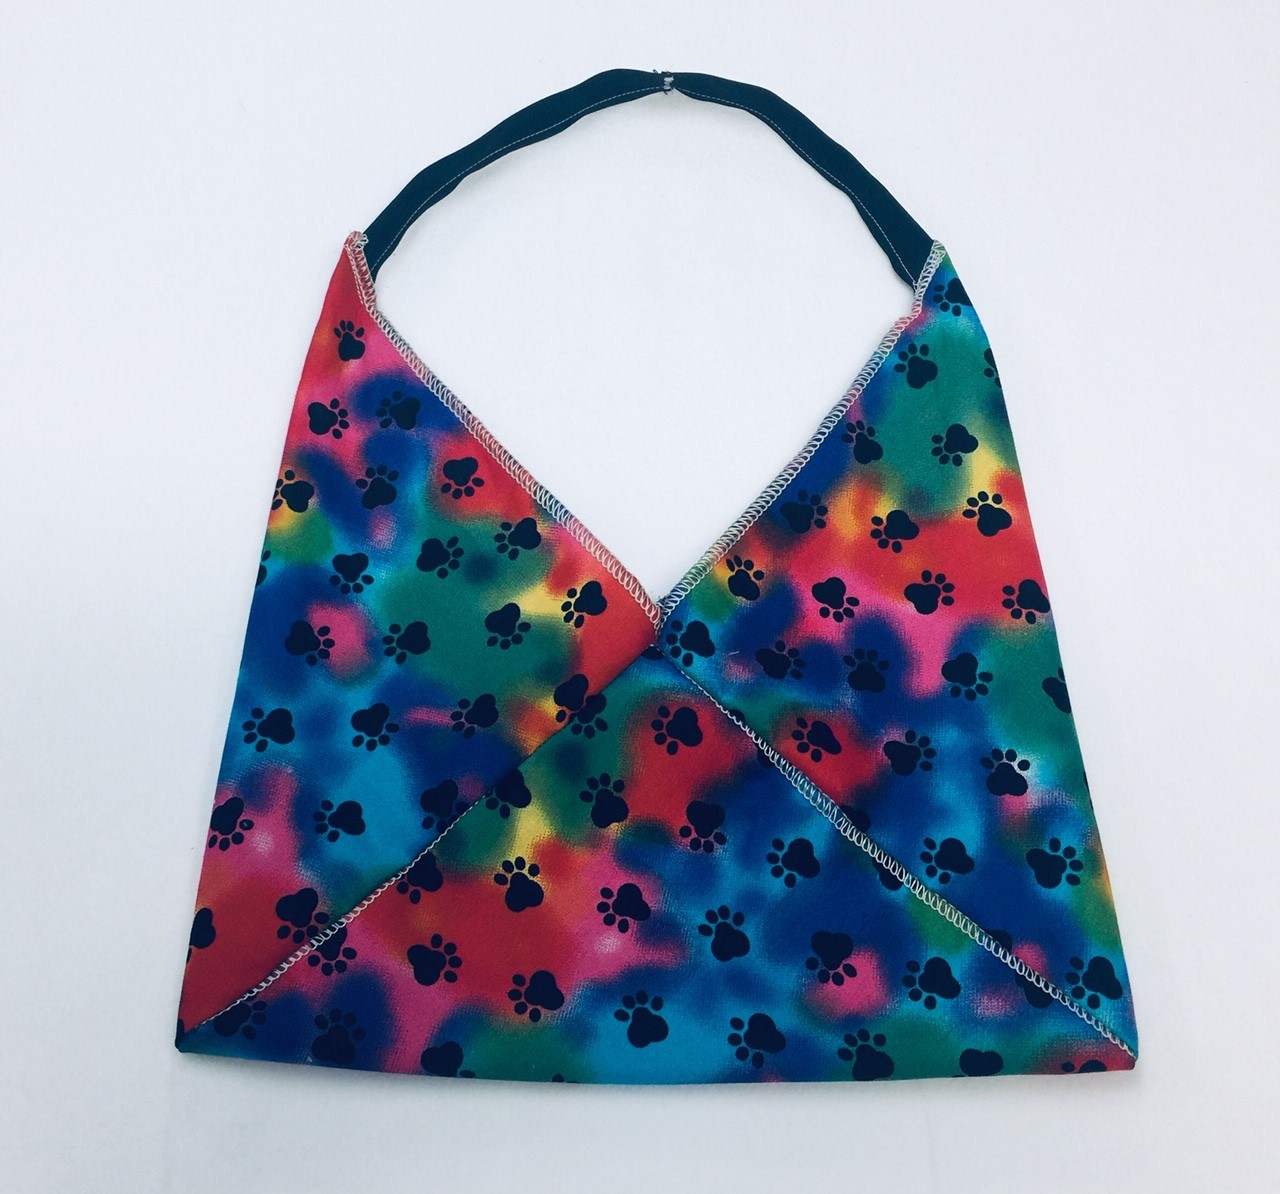 Small origami cotton bag kit with blue pink and green tie dye and black paw print pattern